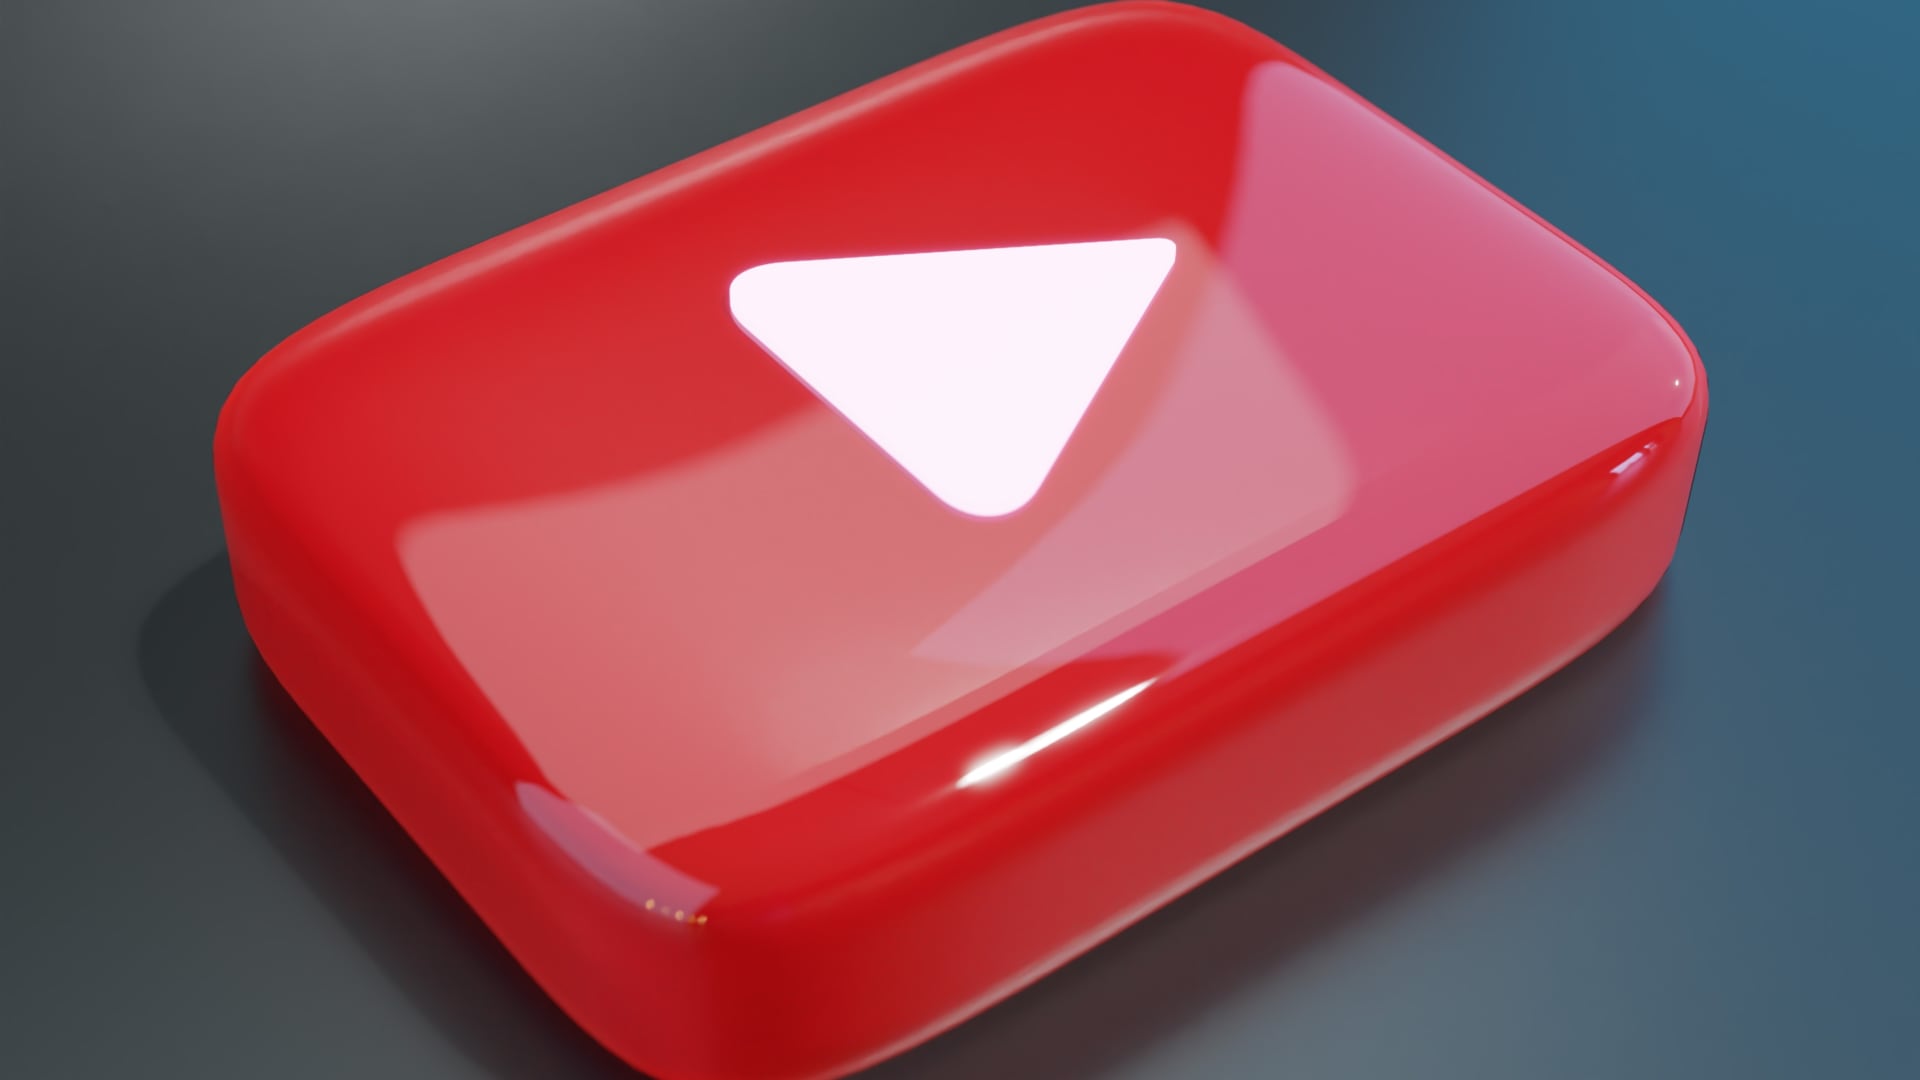 Glossy rendering of YouTube's red button with a white Play symbol